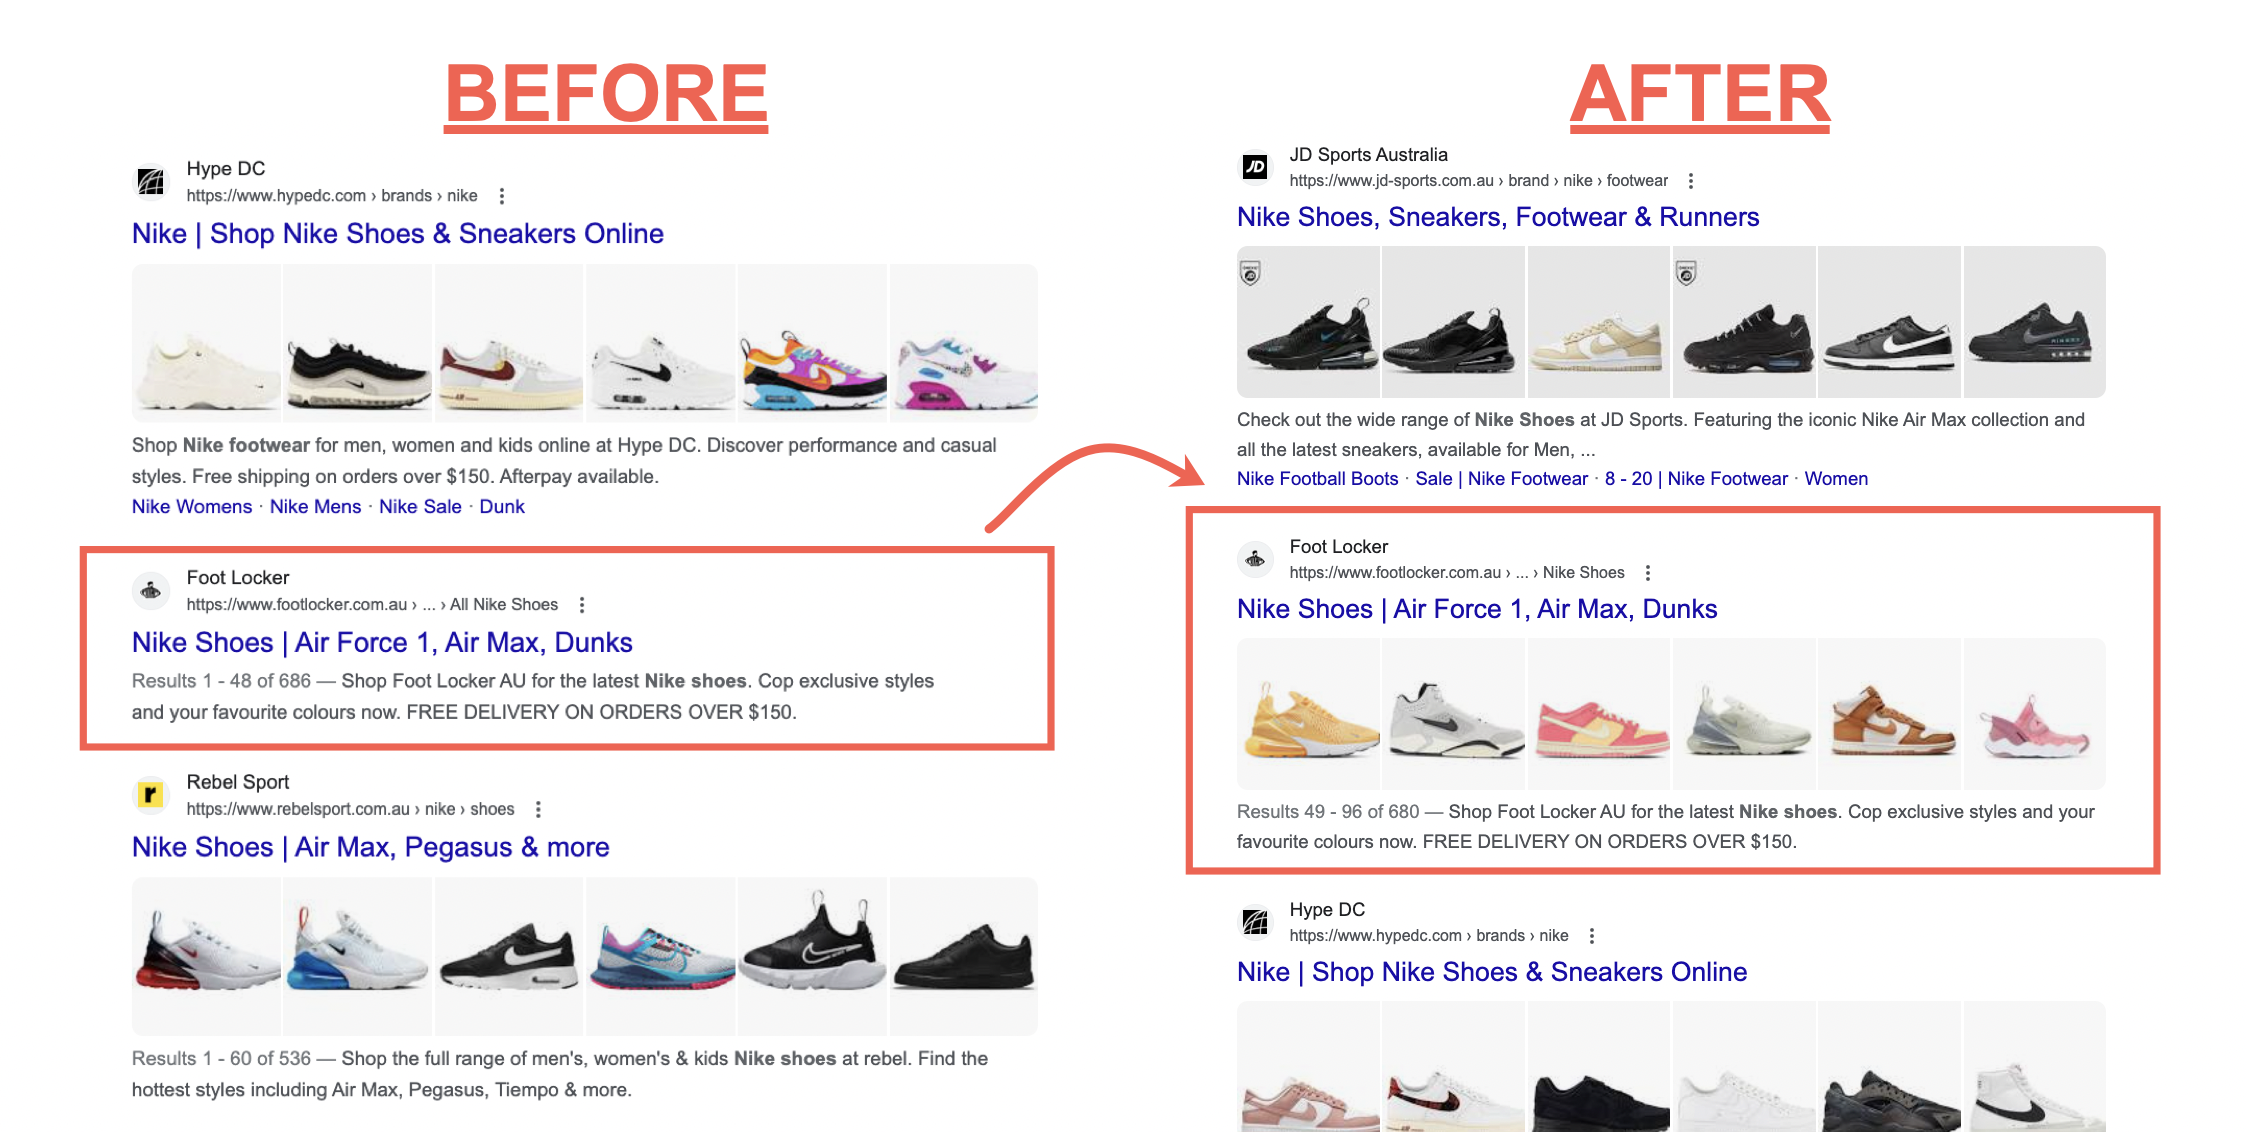 Foot Locker Image SEO Case Study: 228% Increase for Google Image Thumbnails  - Brodie Clark Consulting